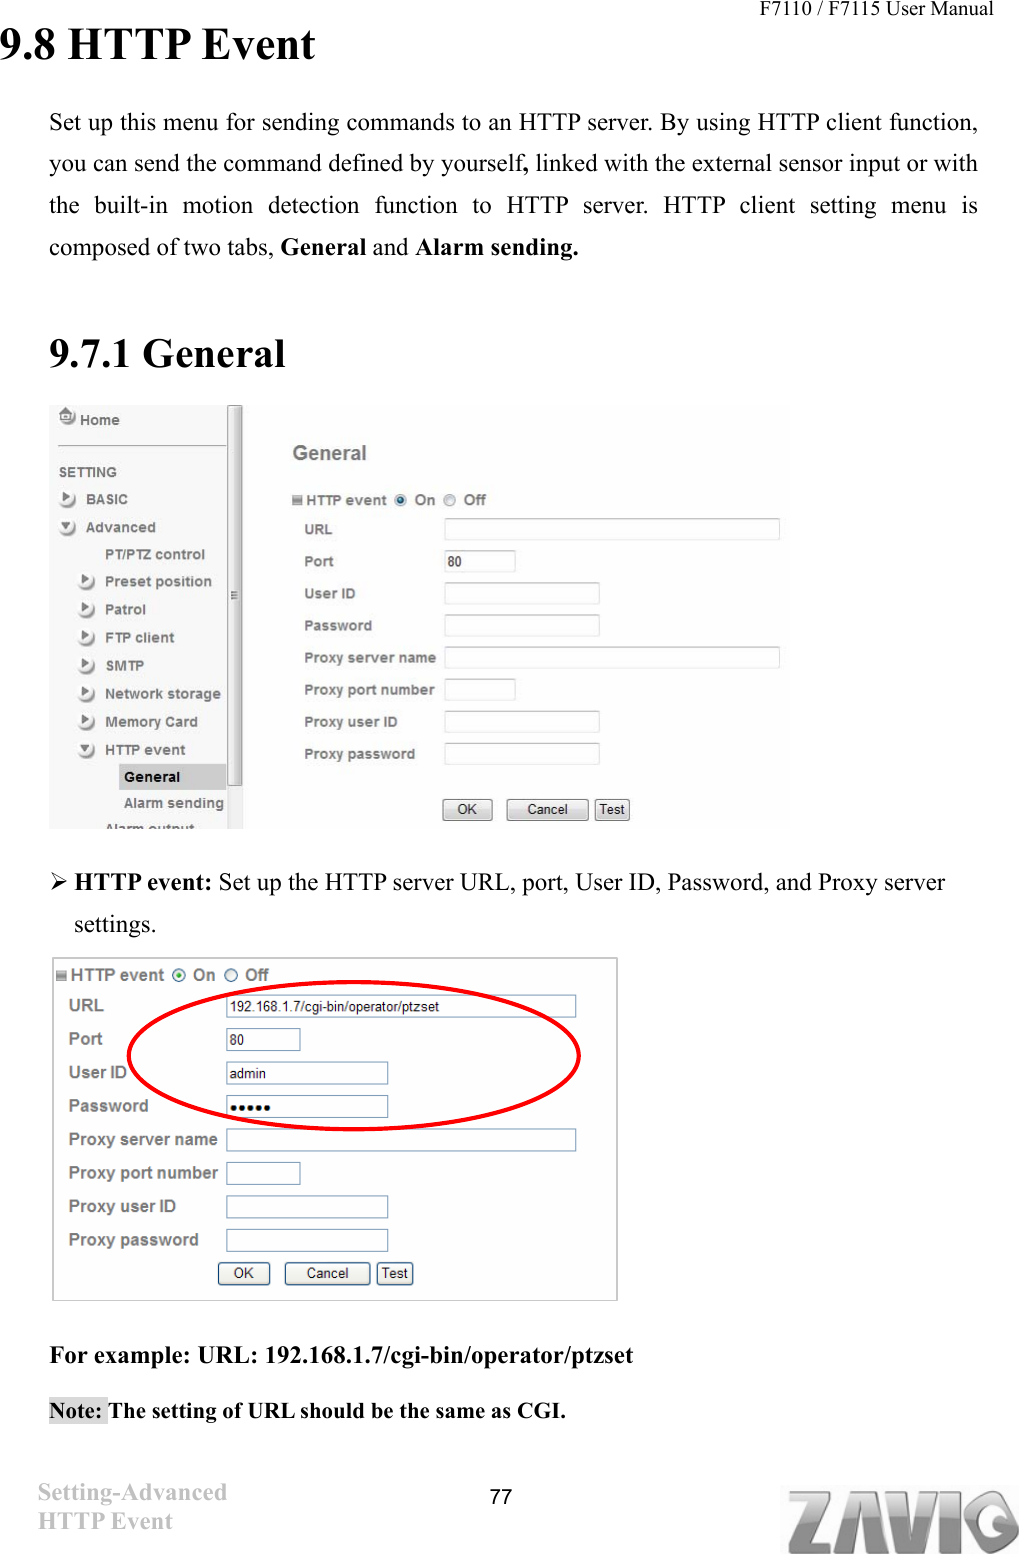 F7110 / F7115 User Manual   9.8 HTTP Event Set up this menu for sending commands to an HTTP server. By using HTTP client function, you can send the command defined by yourself, linked with the external sensor input or with the built-in motion detection function to HTTP server. HTTP client setting menu is composed of two tabs, General and Alarm sending.  9.7.1 General       HTTP event: Set up the HTTP server URL, port, User ID, Password, and Proxy server settings.  77             For example: URL: 192.168.1.7/cgi-bin/operator/ptzset  Note: The setting of URL should be the same as CGI.Setting-Advanced HTTP Event   